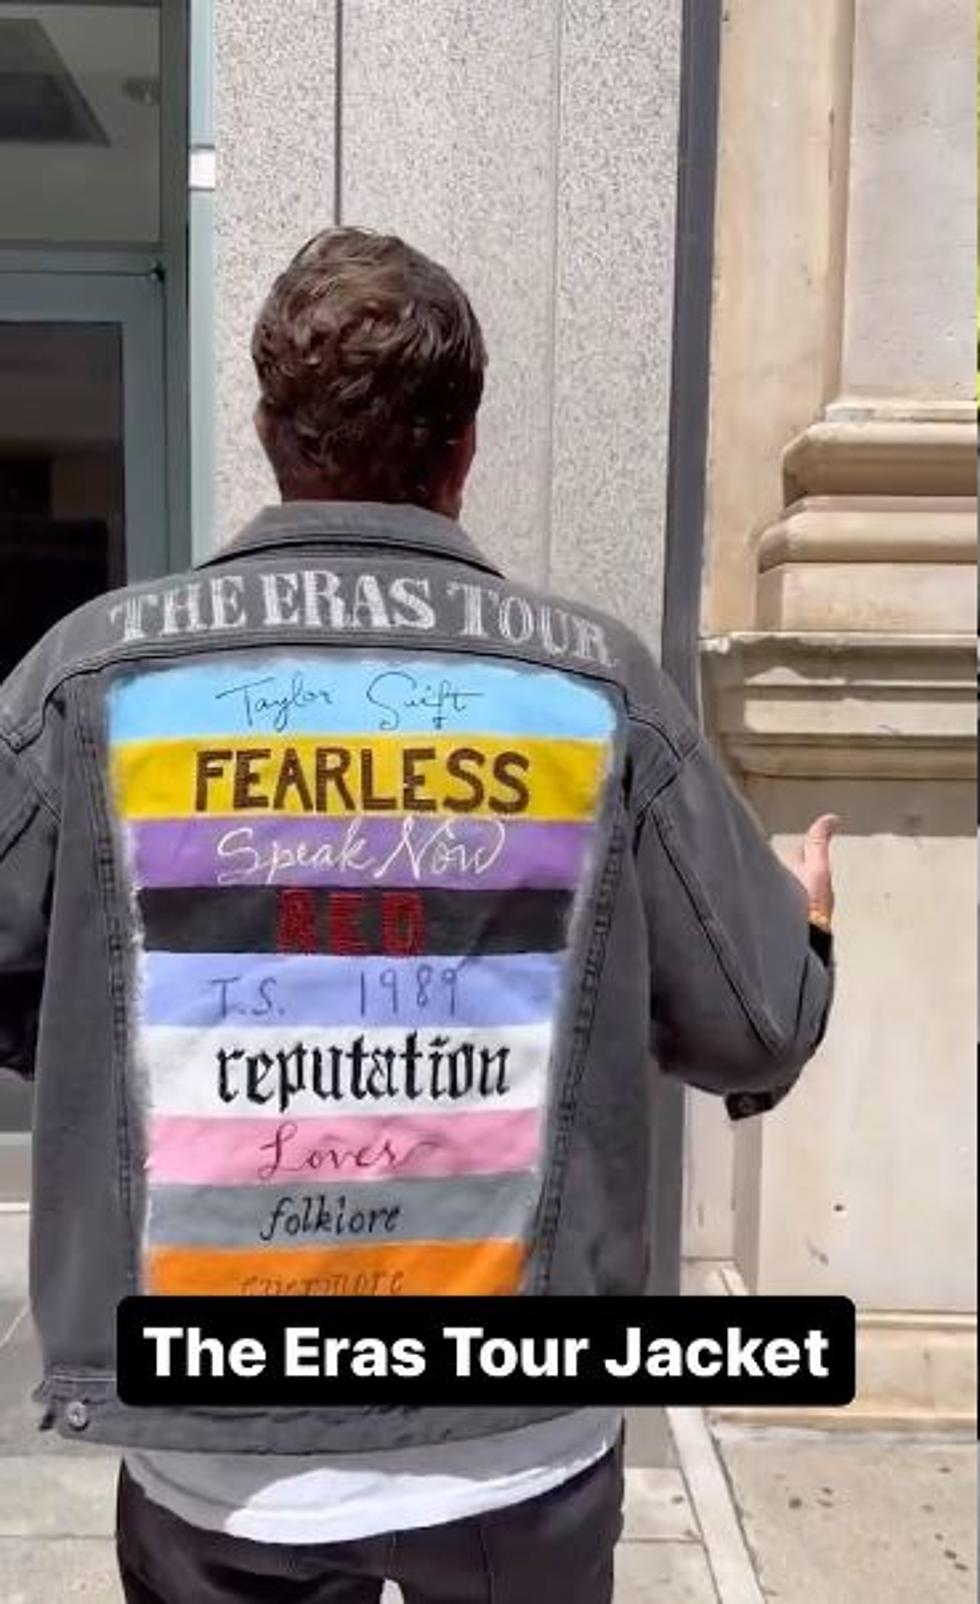 The Epic Journey of Taylor Swift’s Jacket Across the World Began With a New England Fan